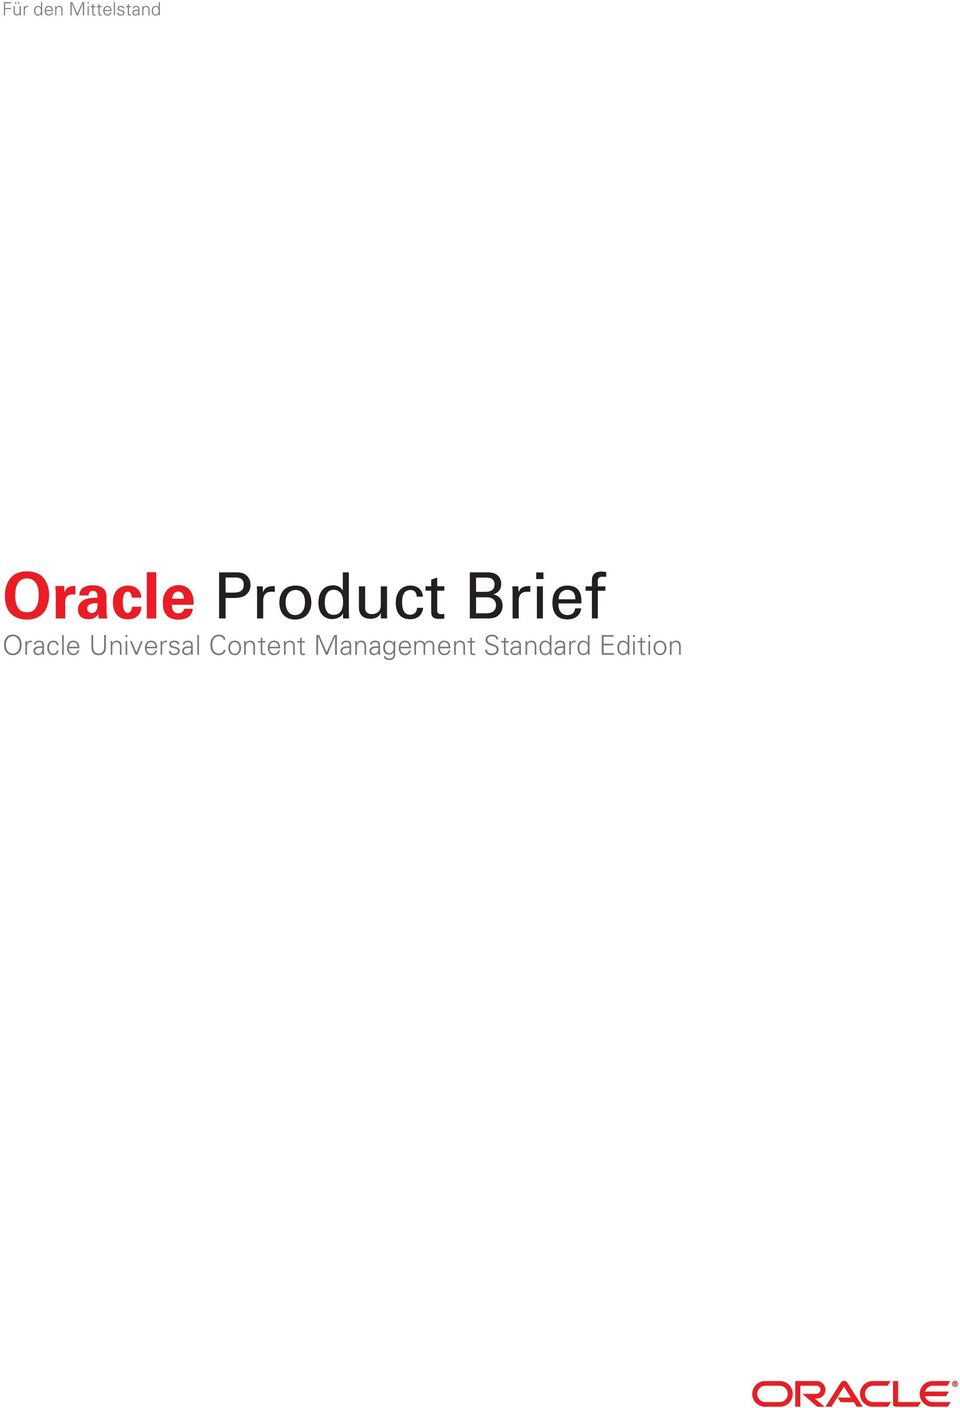 Oracle Product